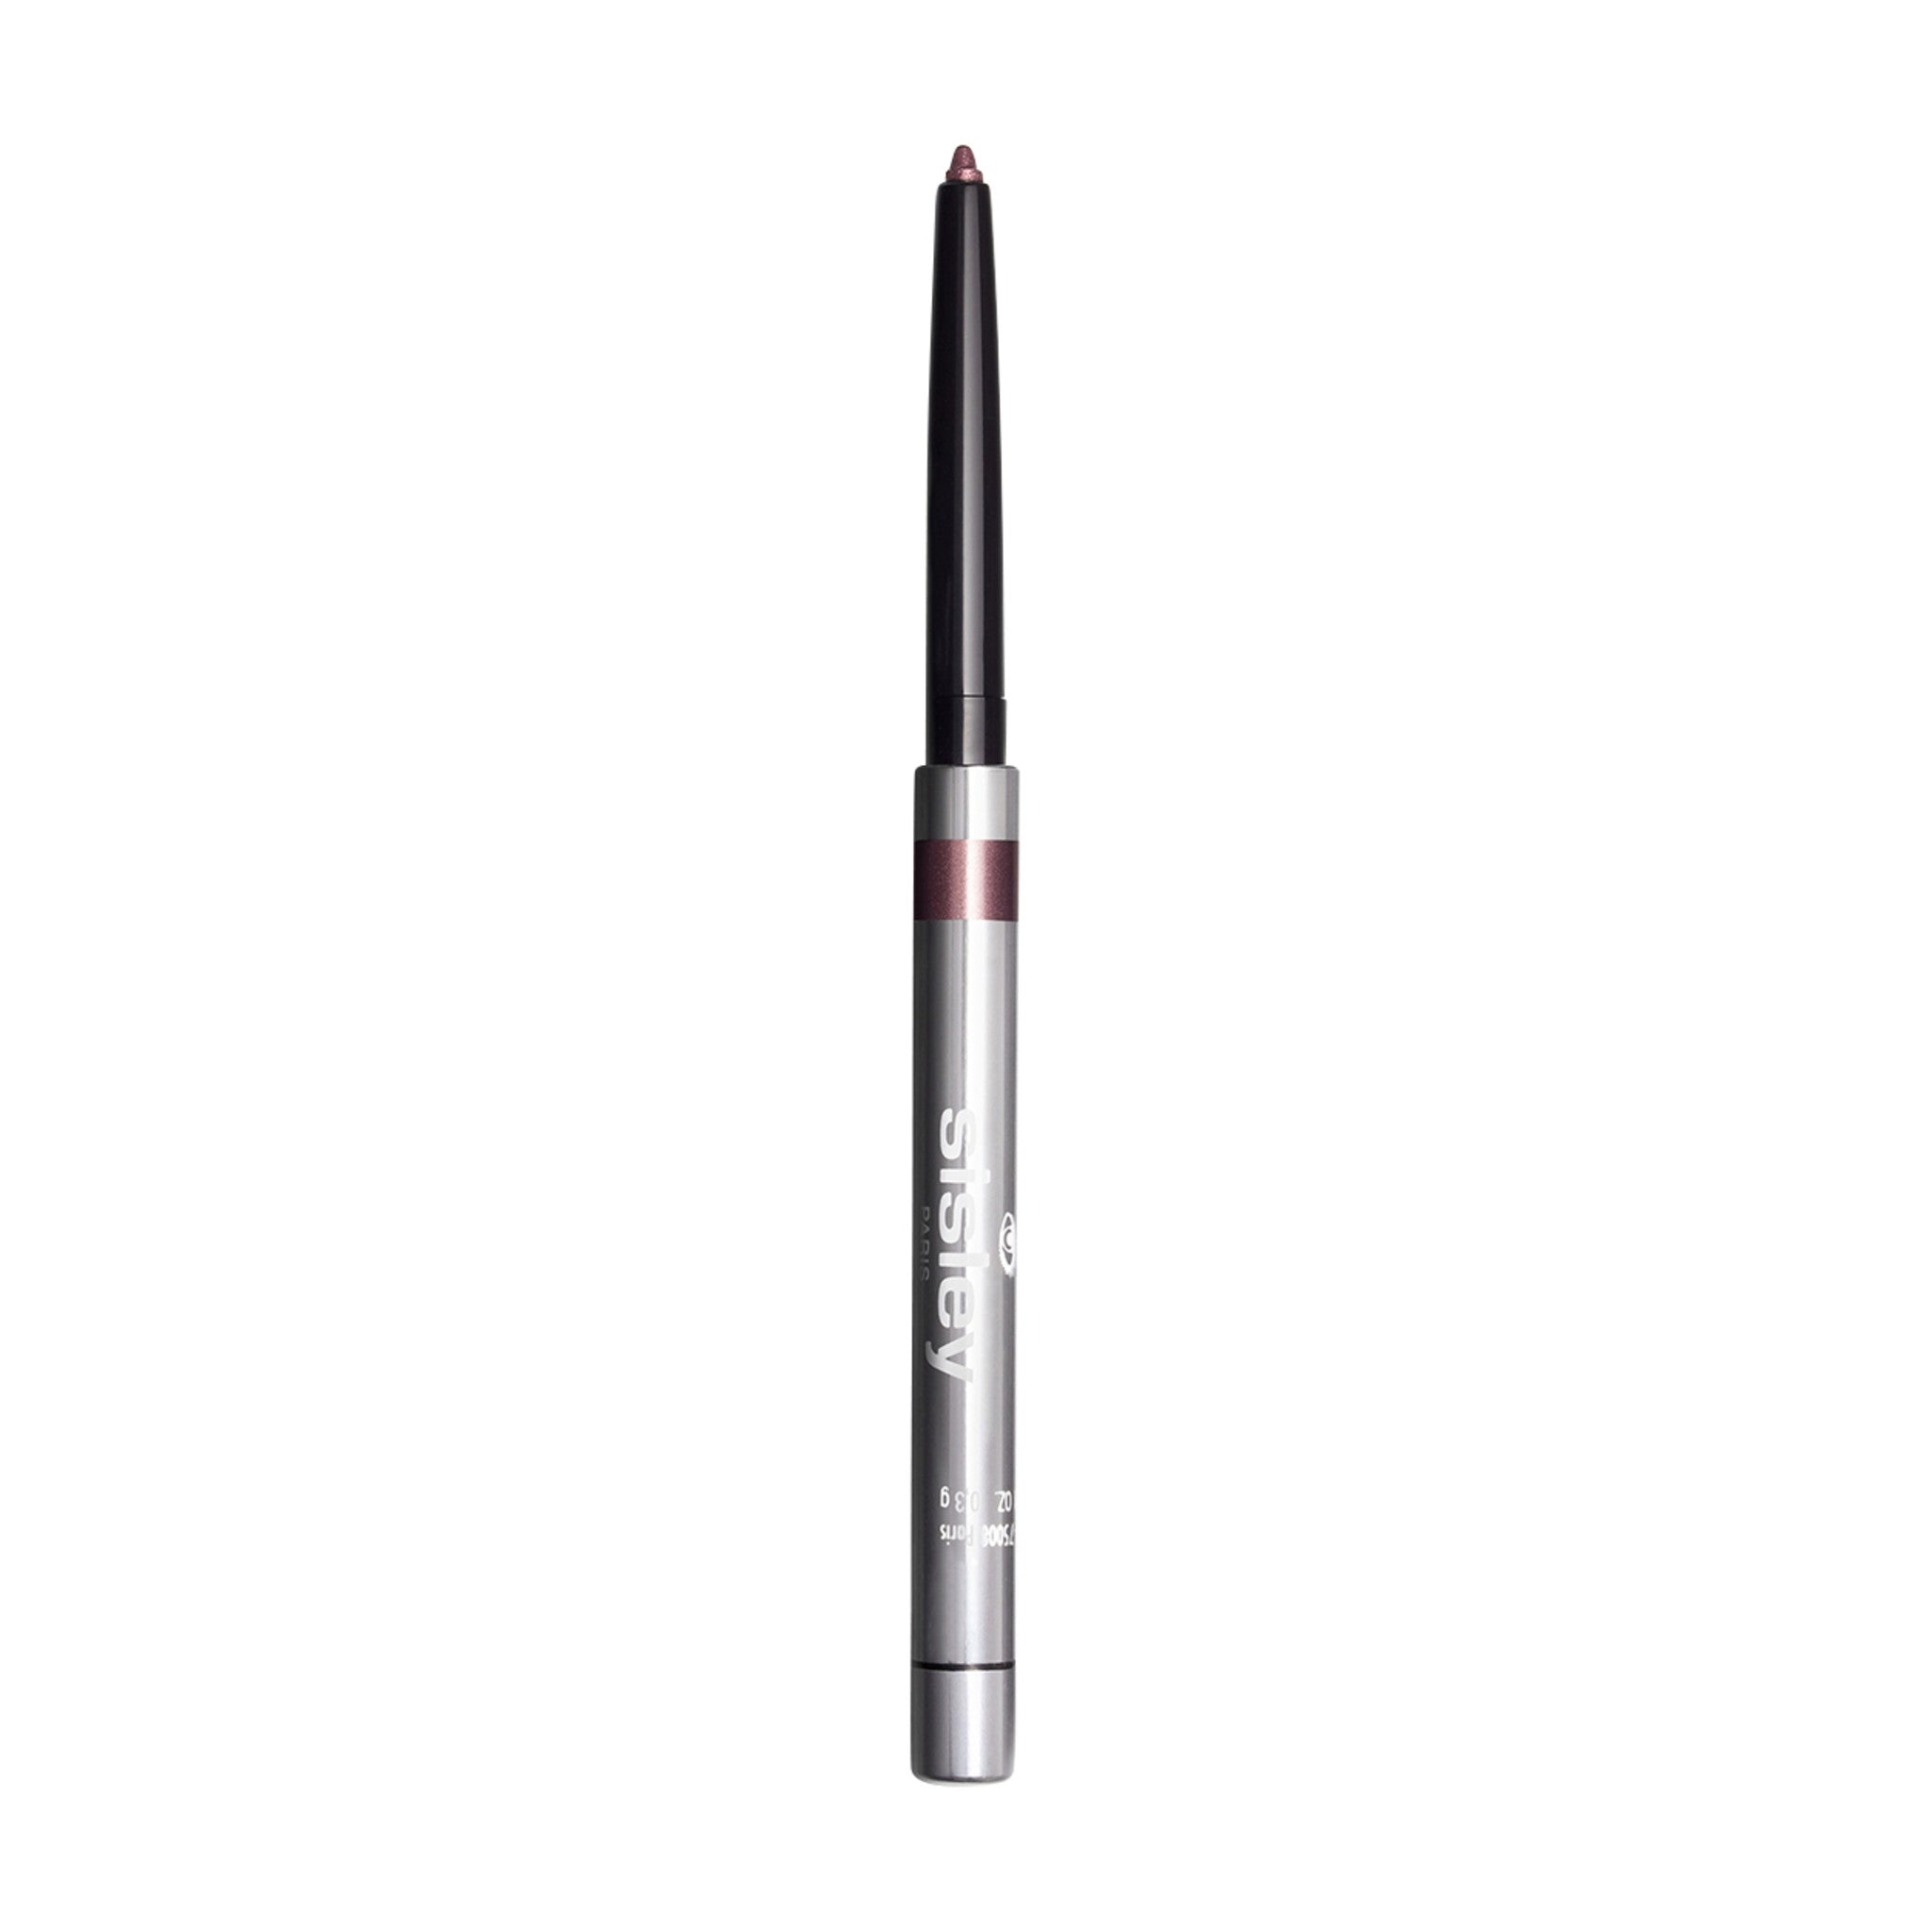 Sisley-Paris Phyto-Khol Star Waterproof Eye Pencil Color/Shade variant: 10 Mystic Plum main image. This product is in the color purple